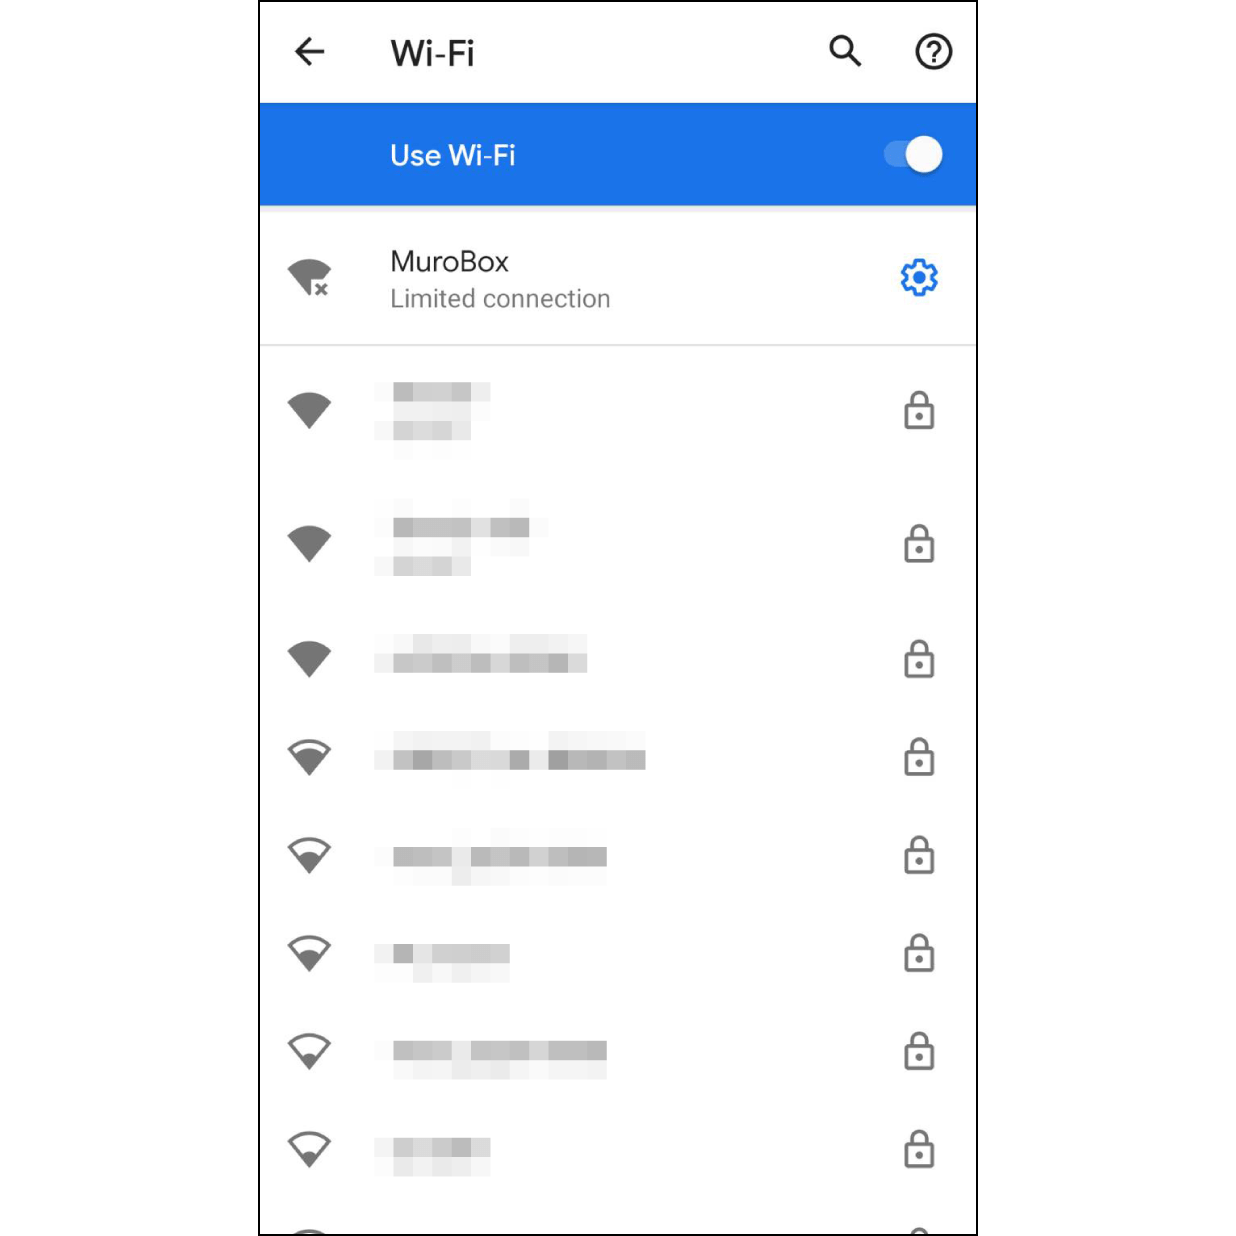 6. Connect to Muro Box Wi-Fi. The newer version of Android phone will automatically connect to Muro Box Wi-Fi. Older versions of Android phones will need to manually go to "Wi-Fi Settings", then select "MuroBox" Wi-Fi. After Wi-Fi is connected, go back to the Muro Box app.